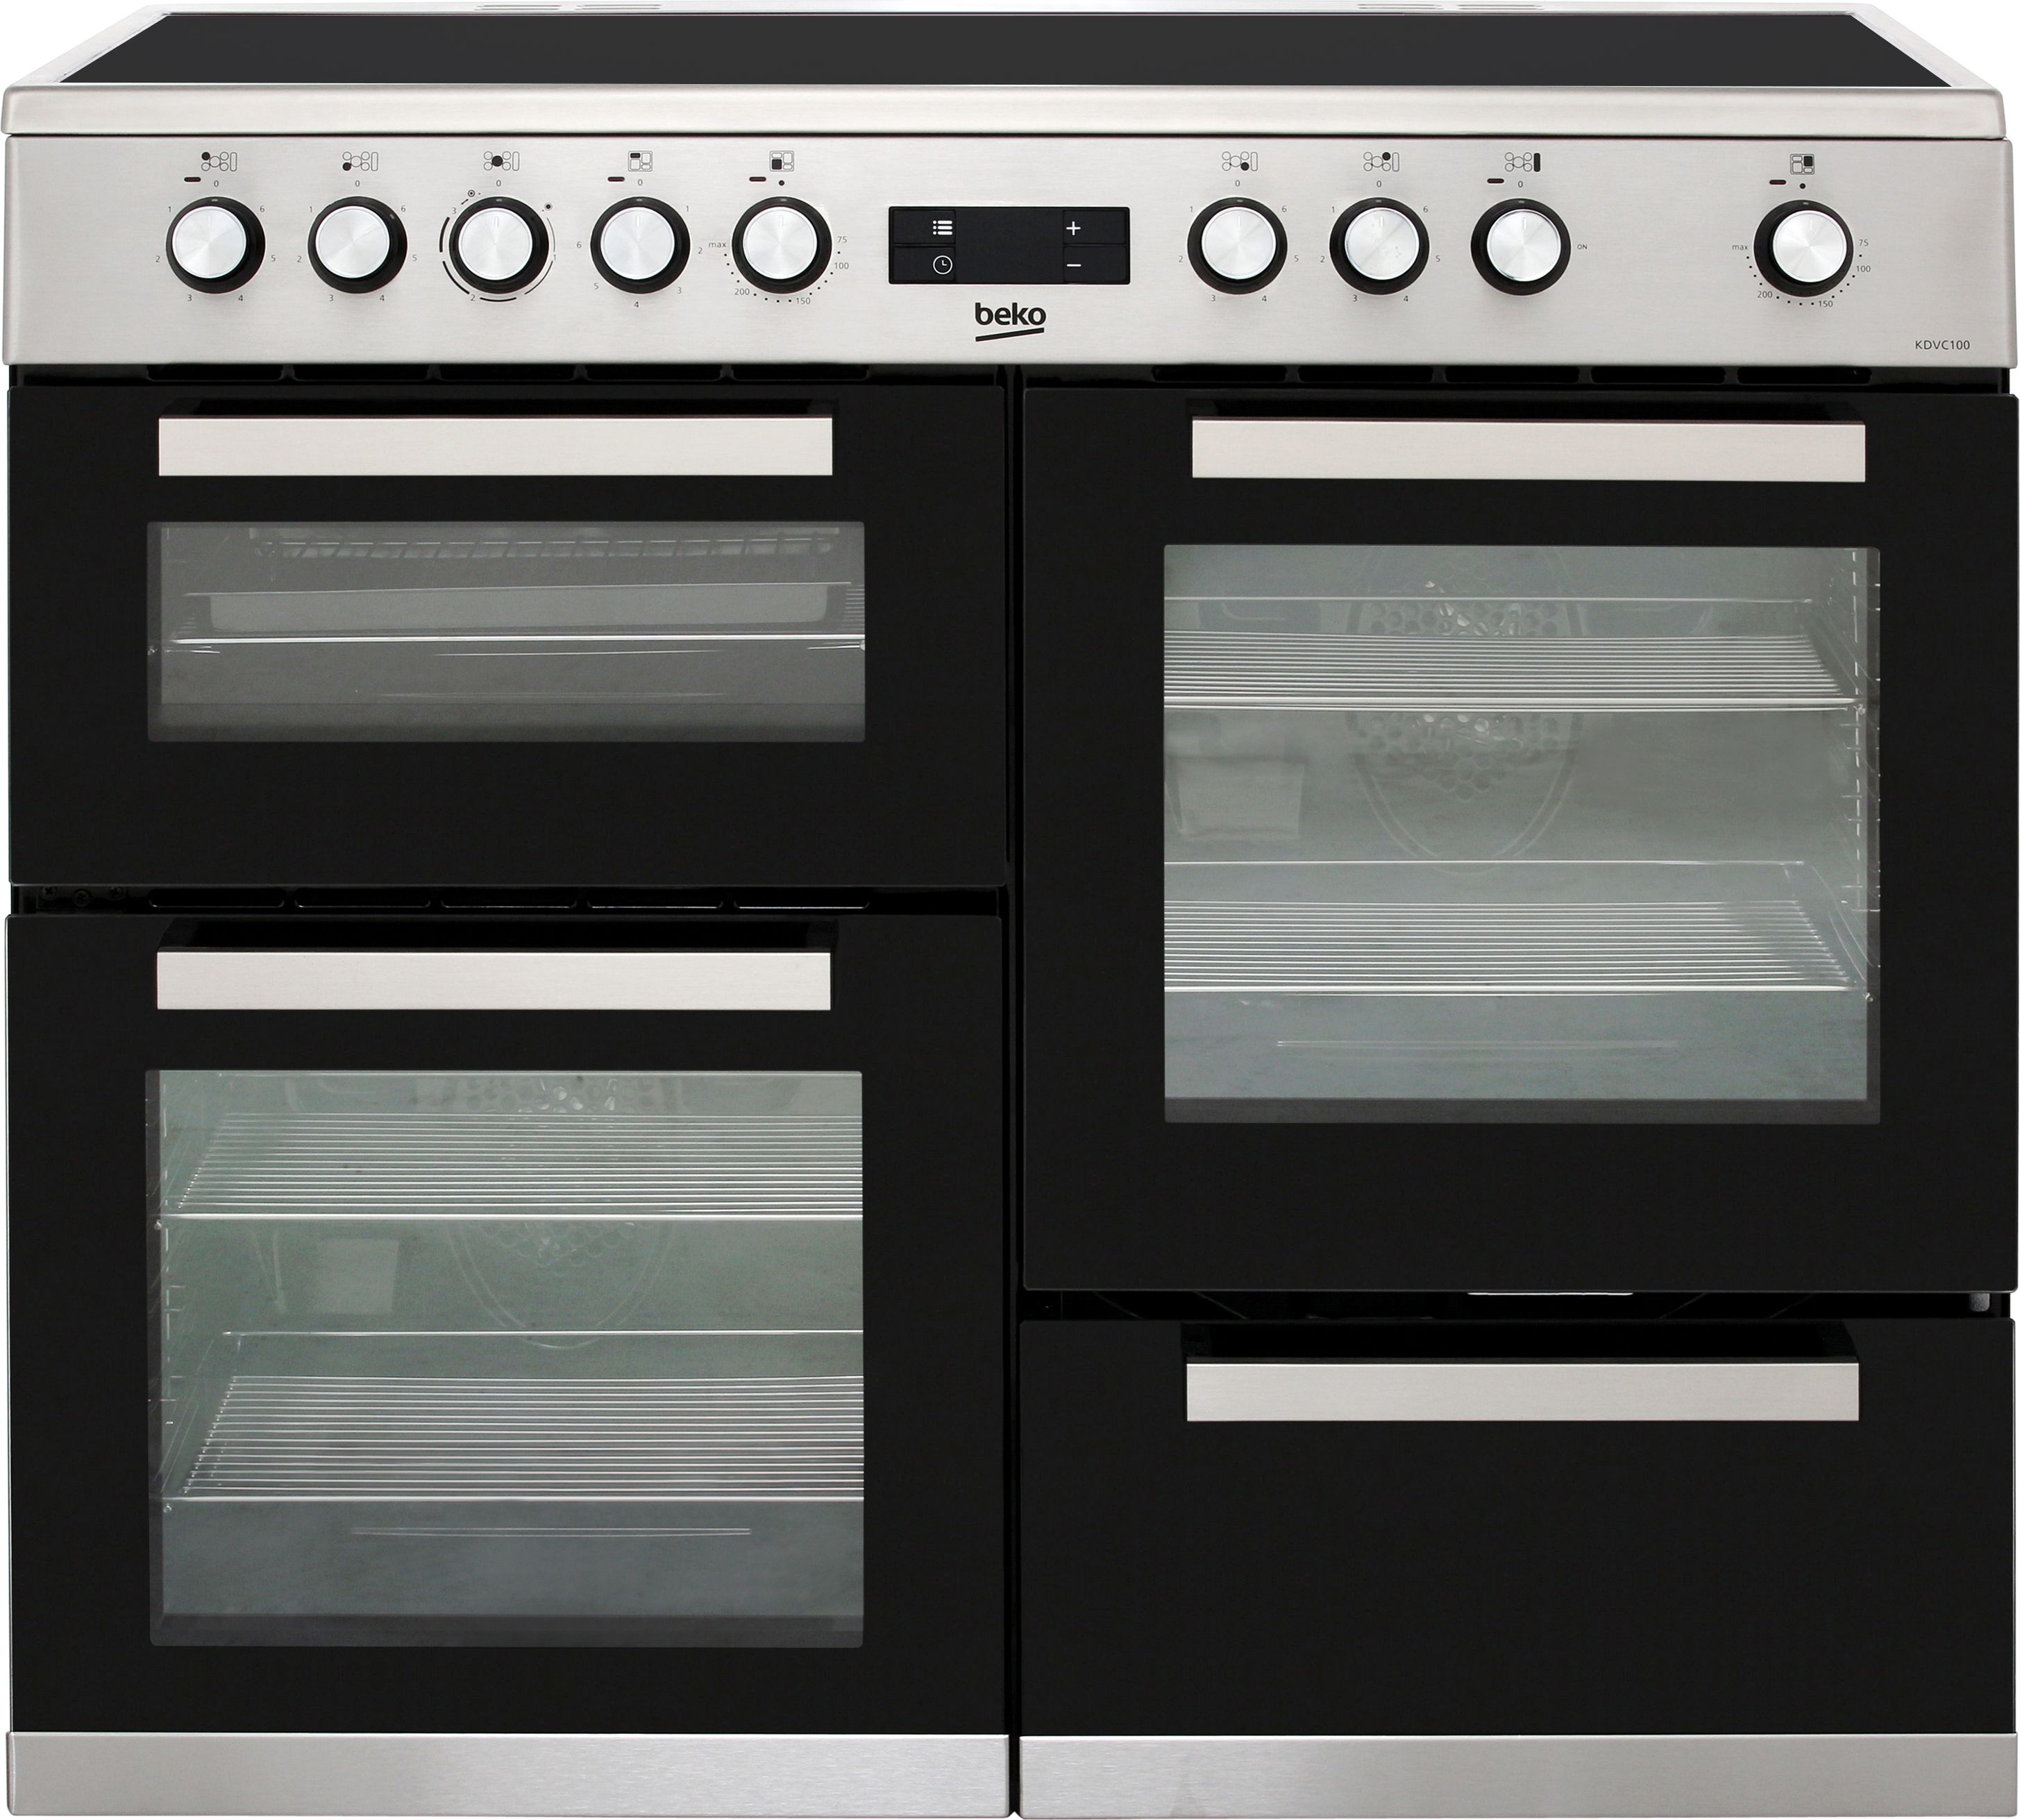 Beko KDVC100X 100cm Electric Range Cooker with Ceramic Hob - Stainless Steel - A/A Rated, Stainless Steel